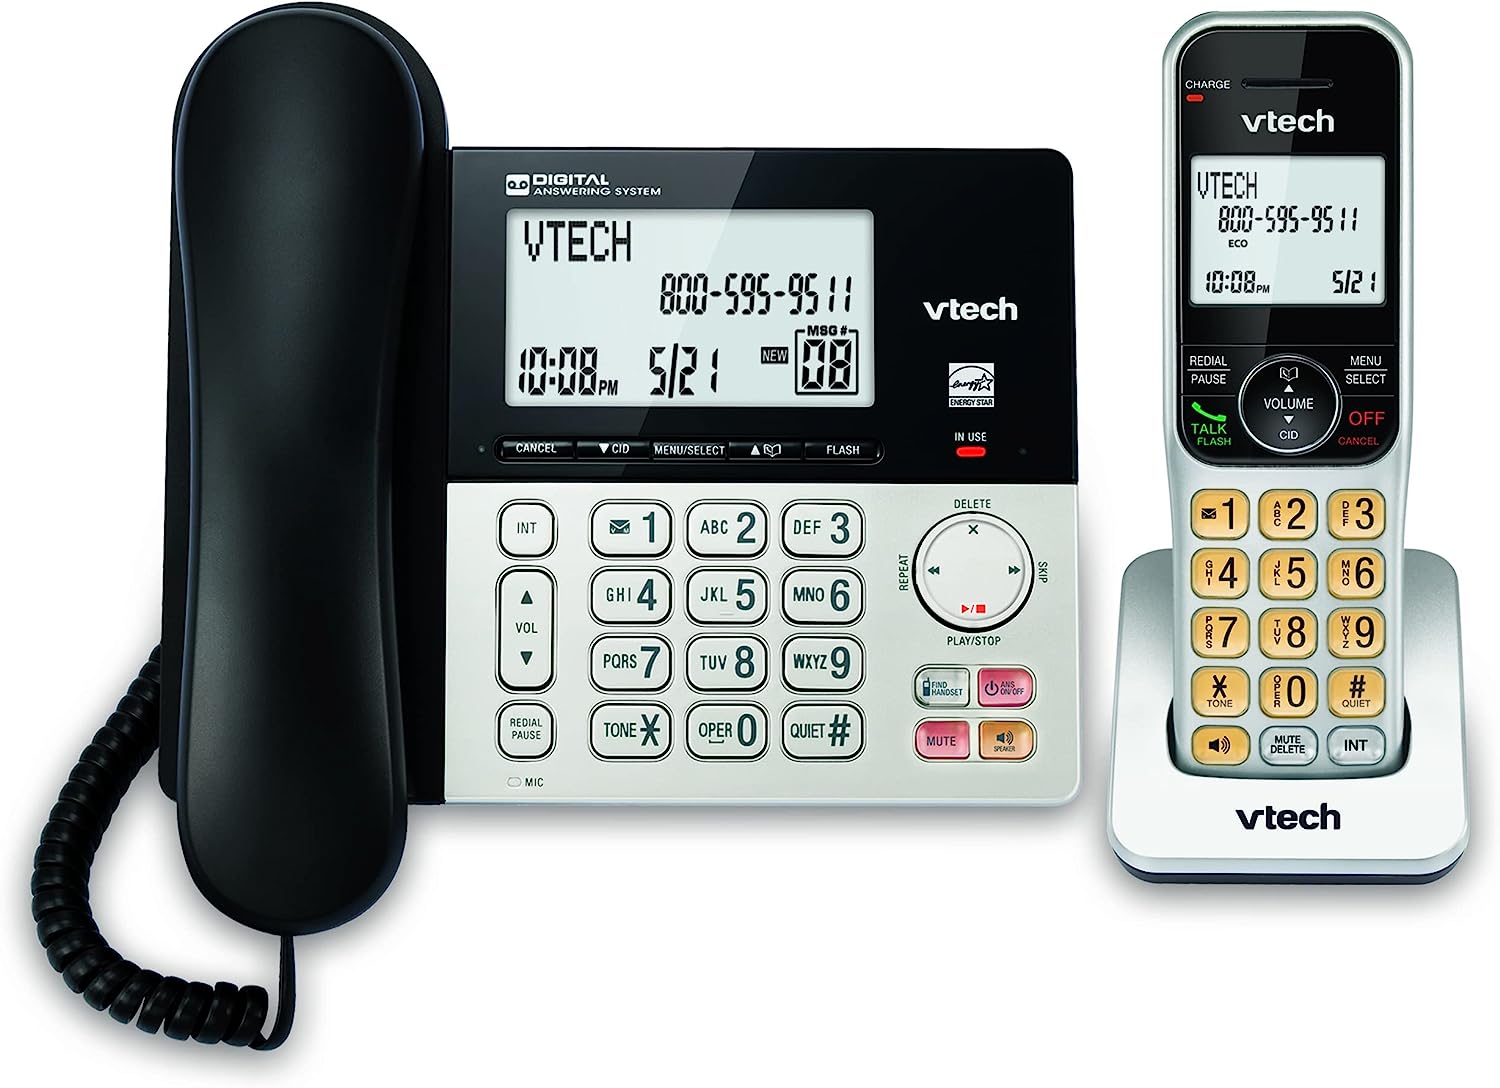 VTECH VG208 DECT 6.0 Corded/Cordless Phone for Home [...]